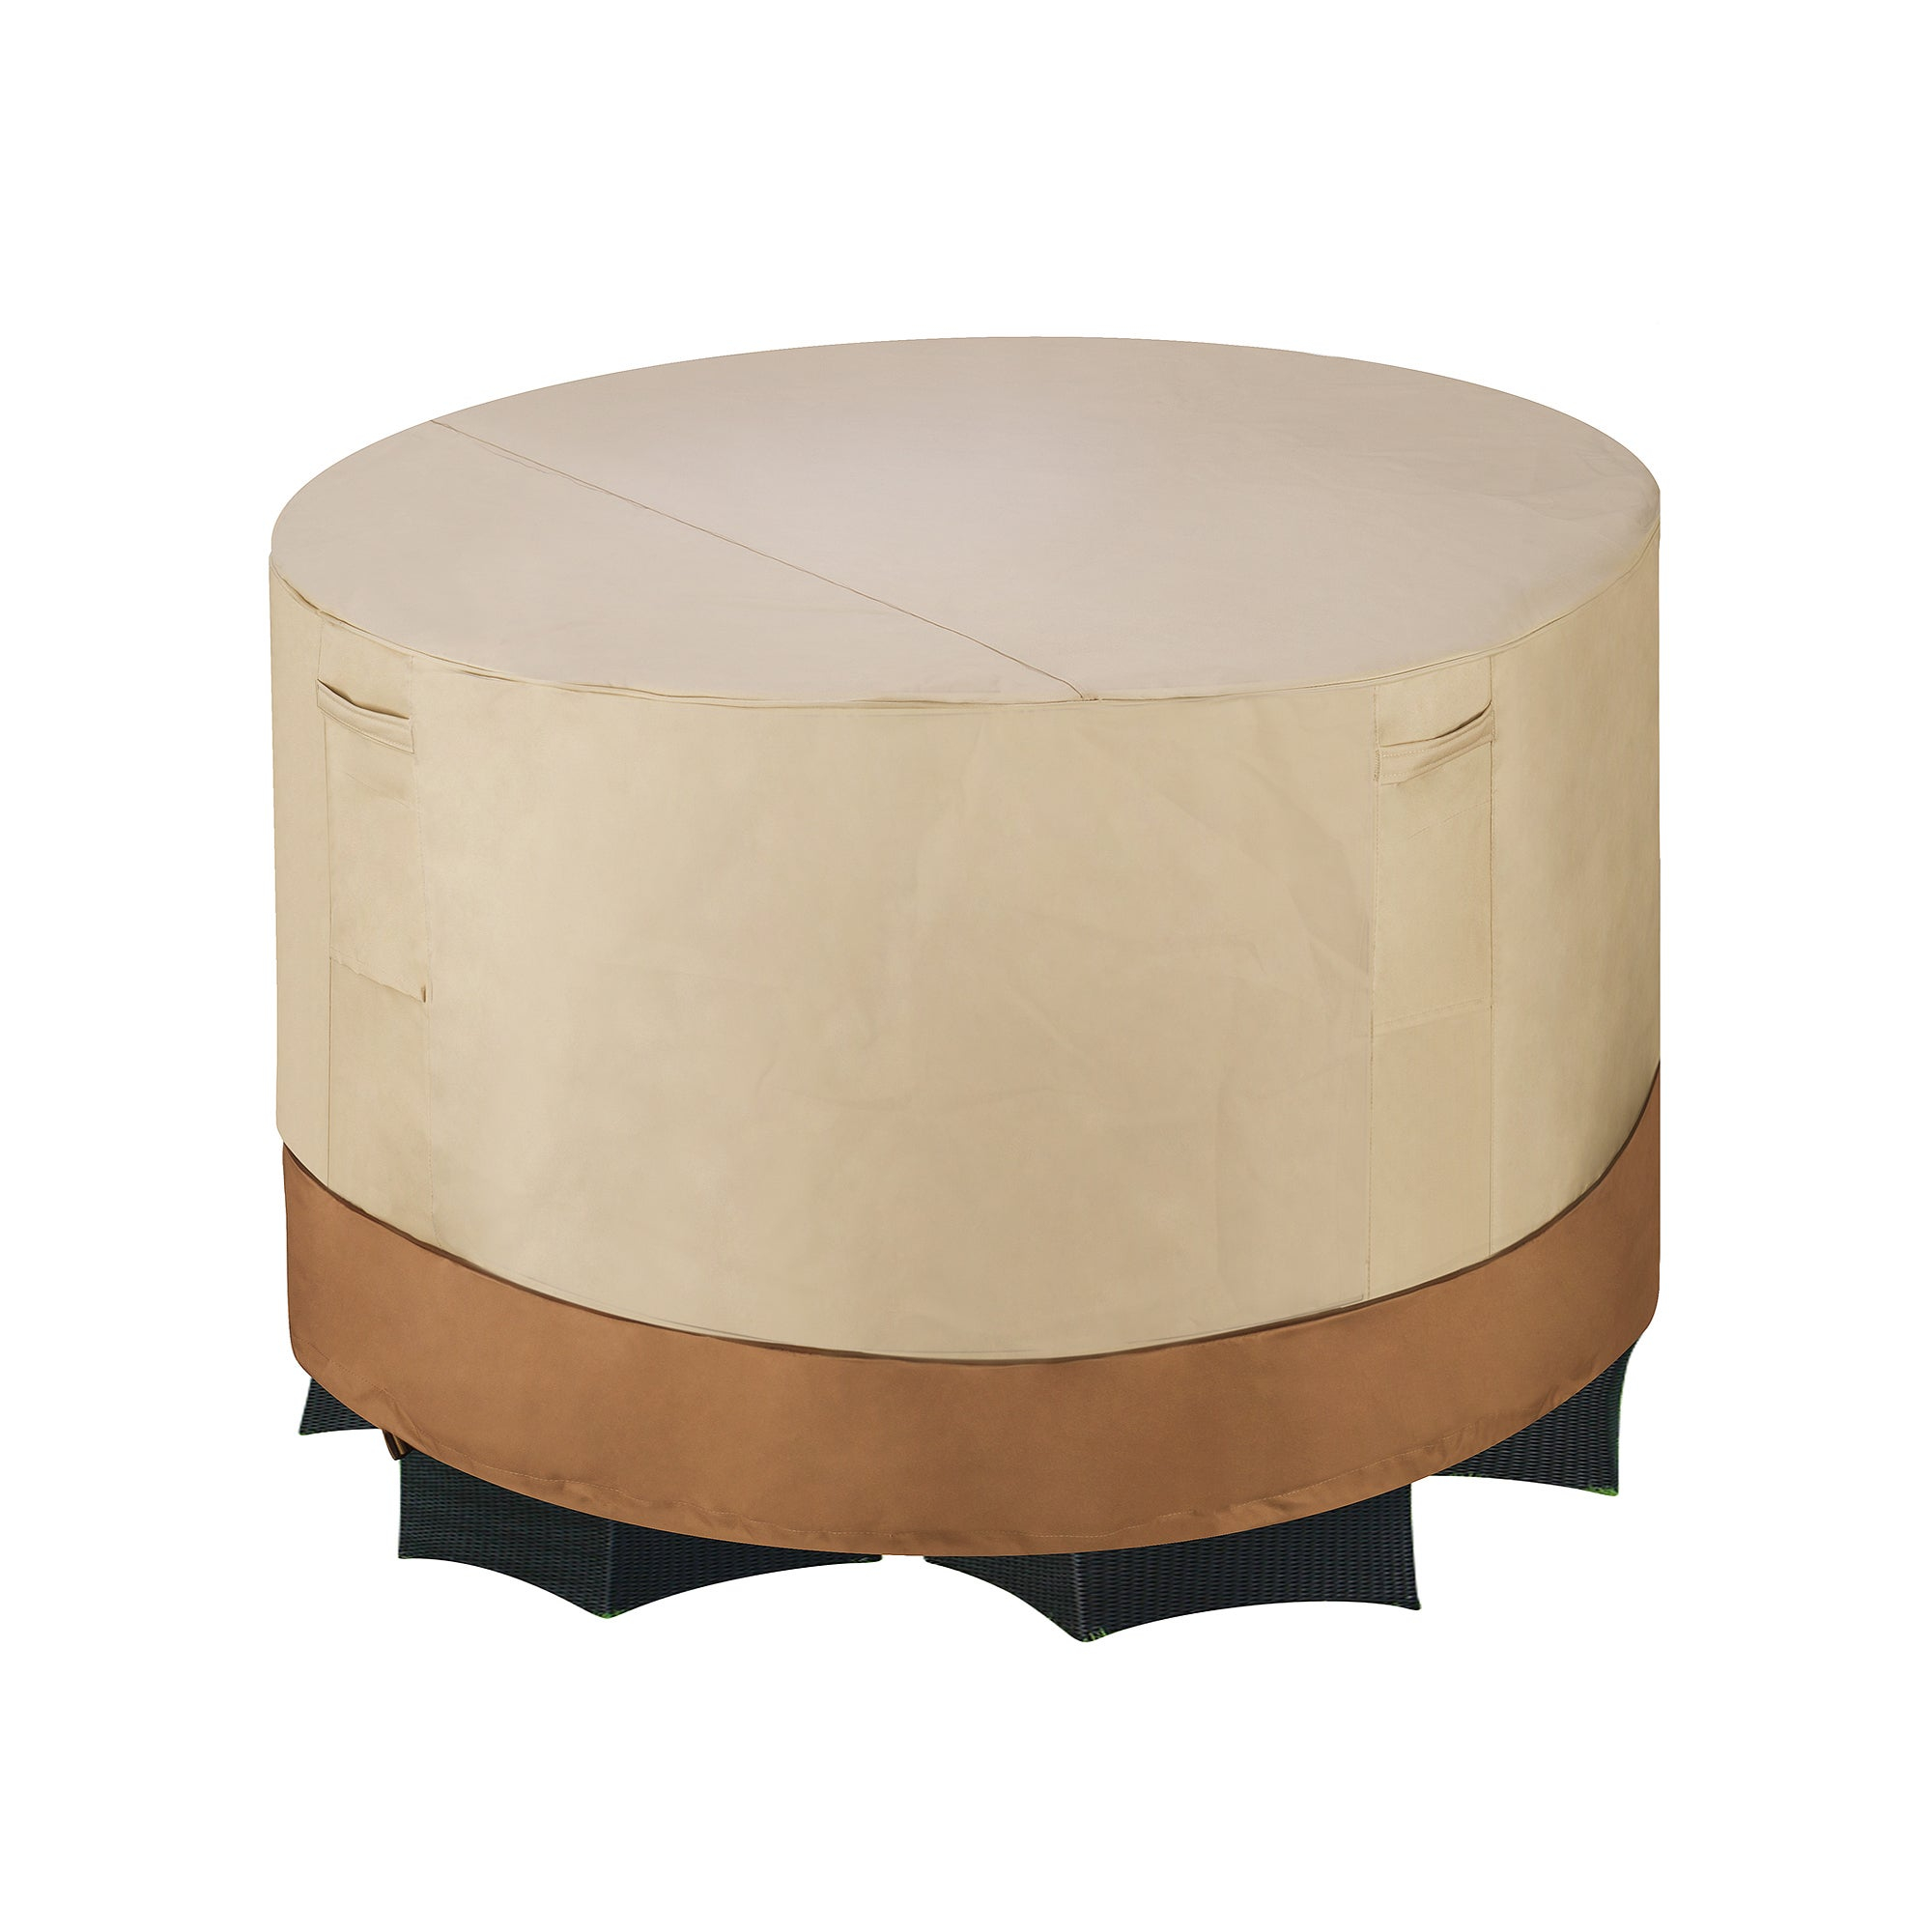 Villacera High Quality Patio Table And Chair Cover Round Beige And Brown 72 Inch inside proportions 2000 X 2000